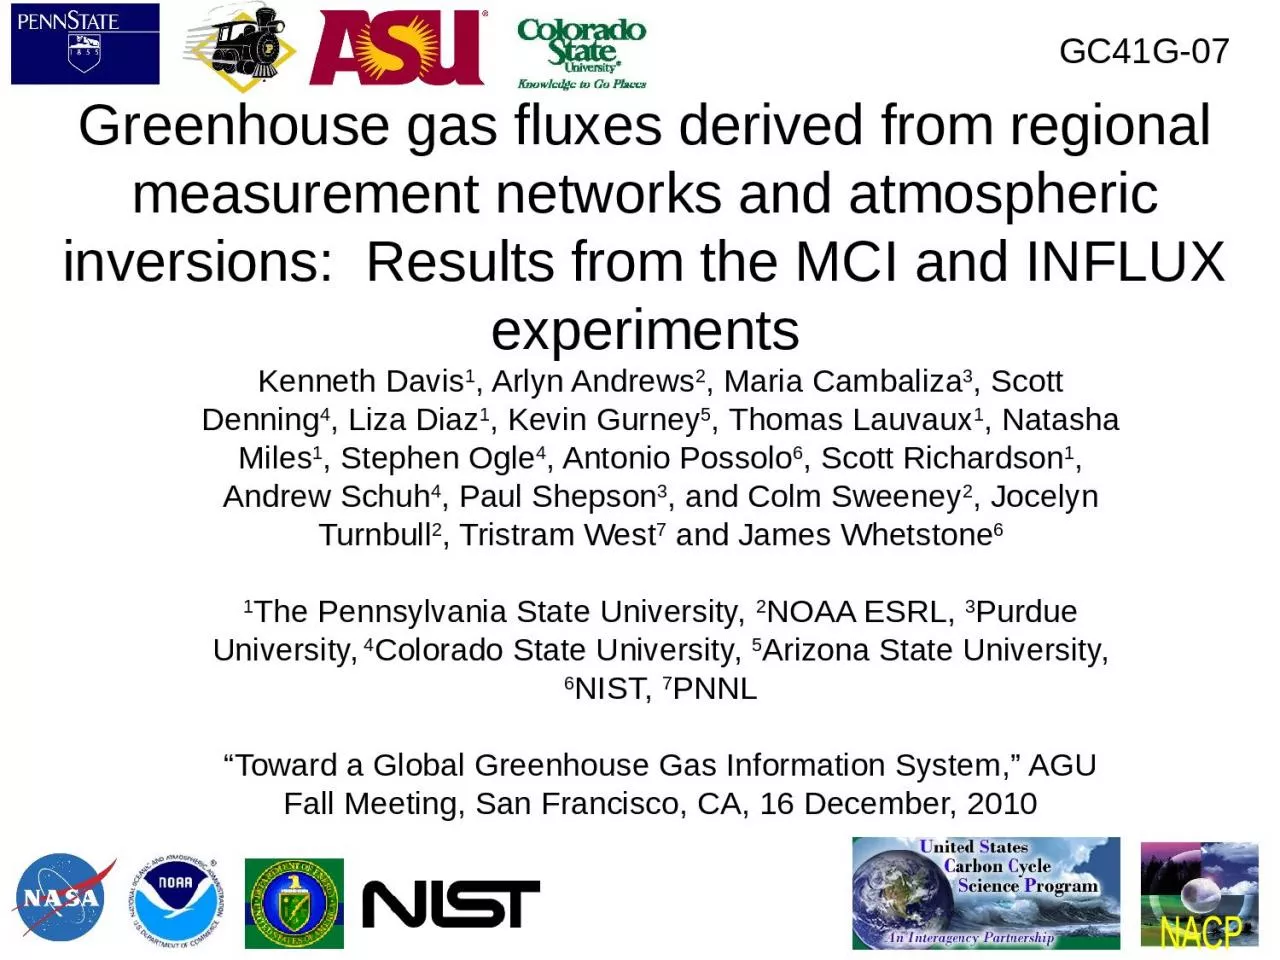 Greenhouse gas fluxes derived from regional measurement networks and atmospheric inversions: